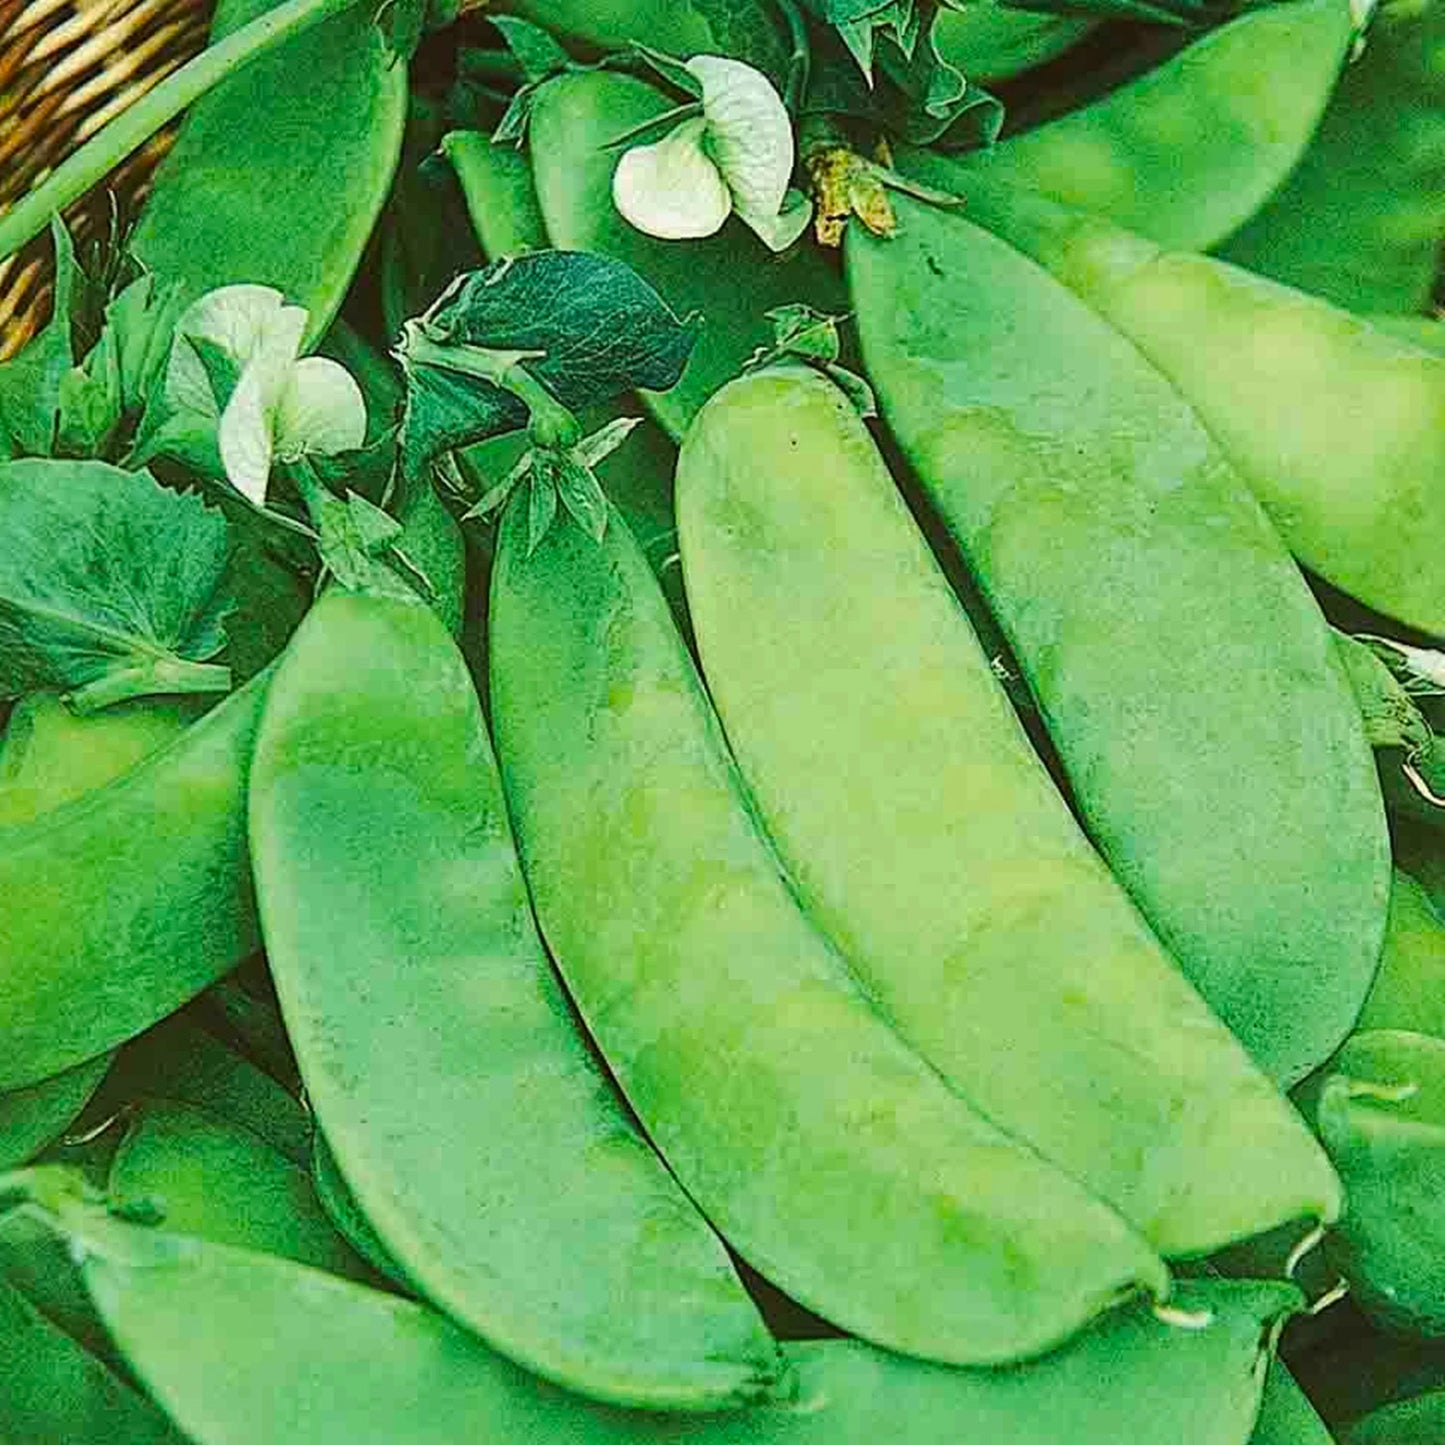 Oregon Sugar Pod Pea seeds fully grown, matured and freshly picked.